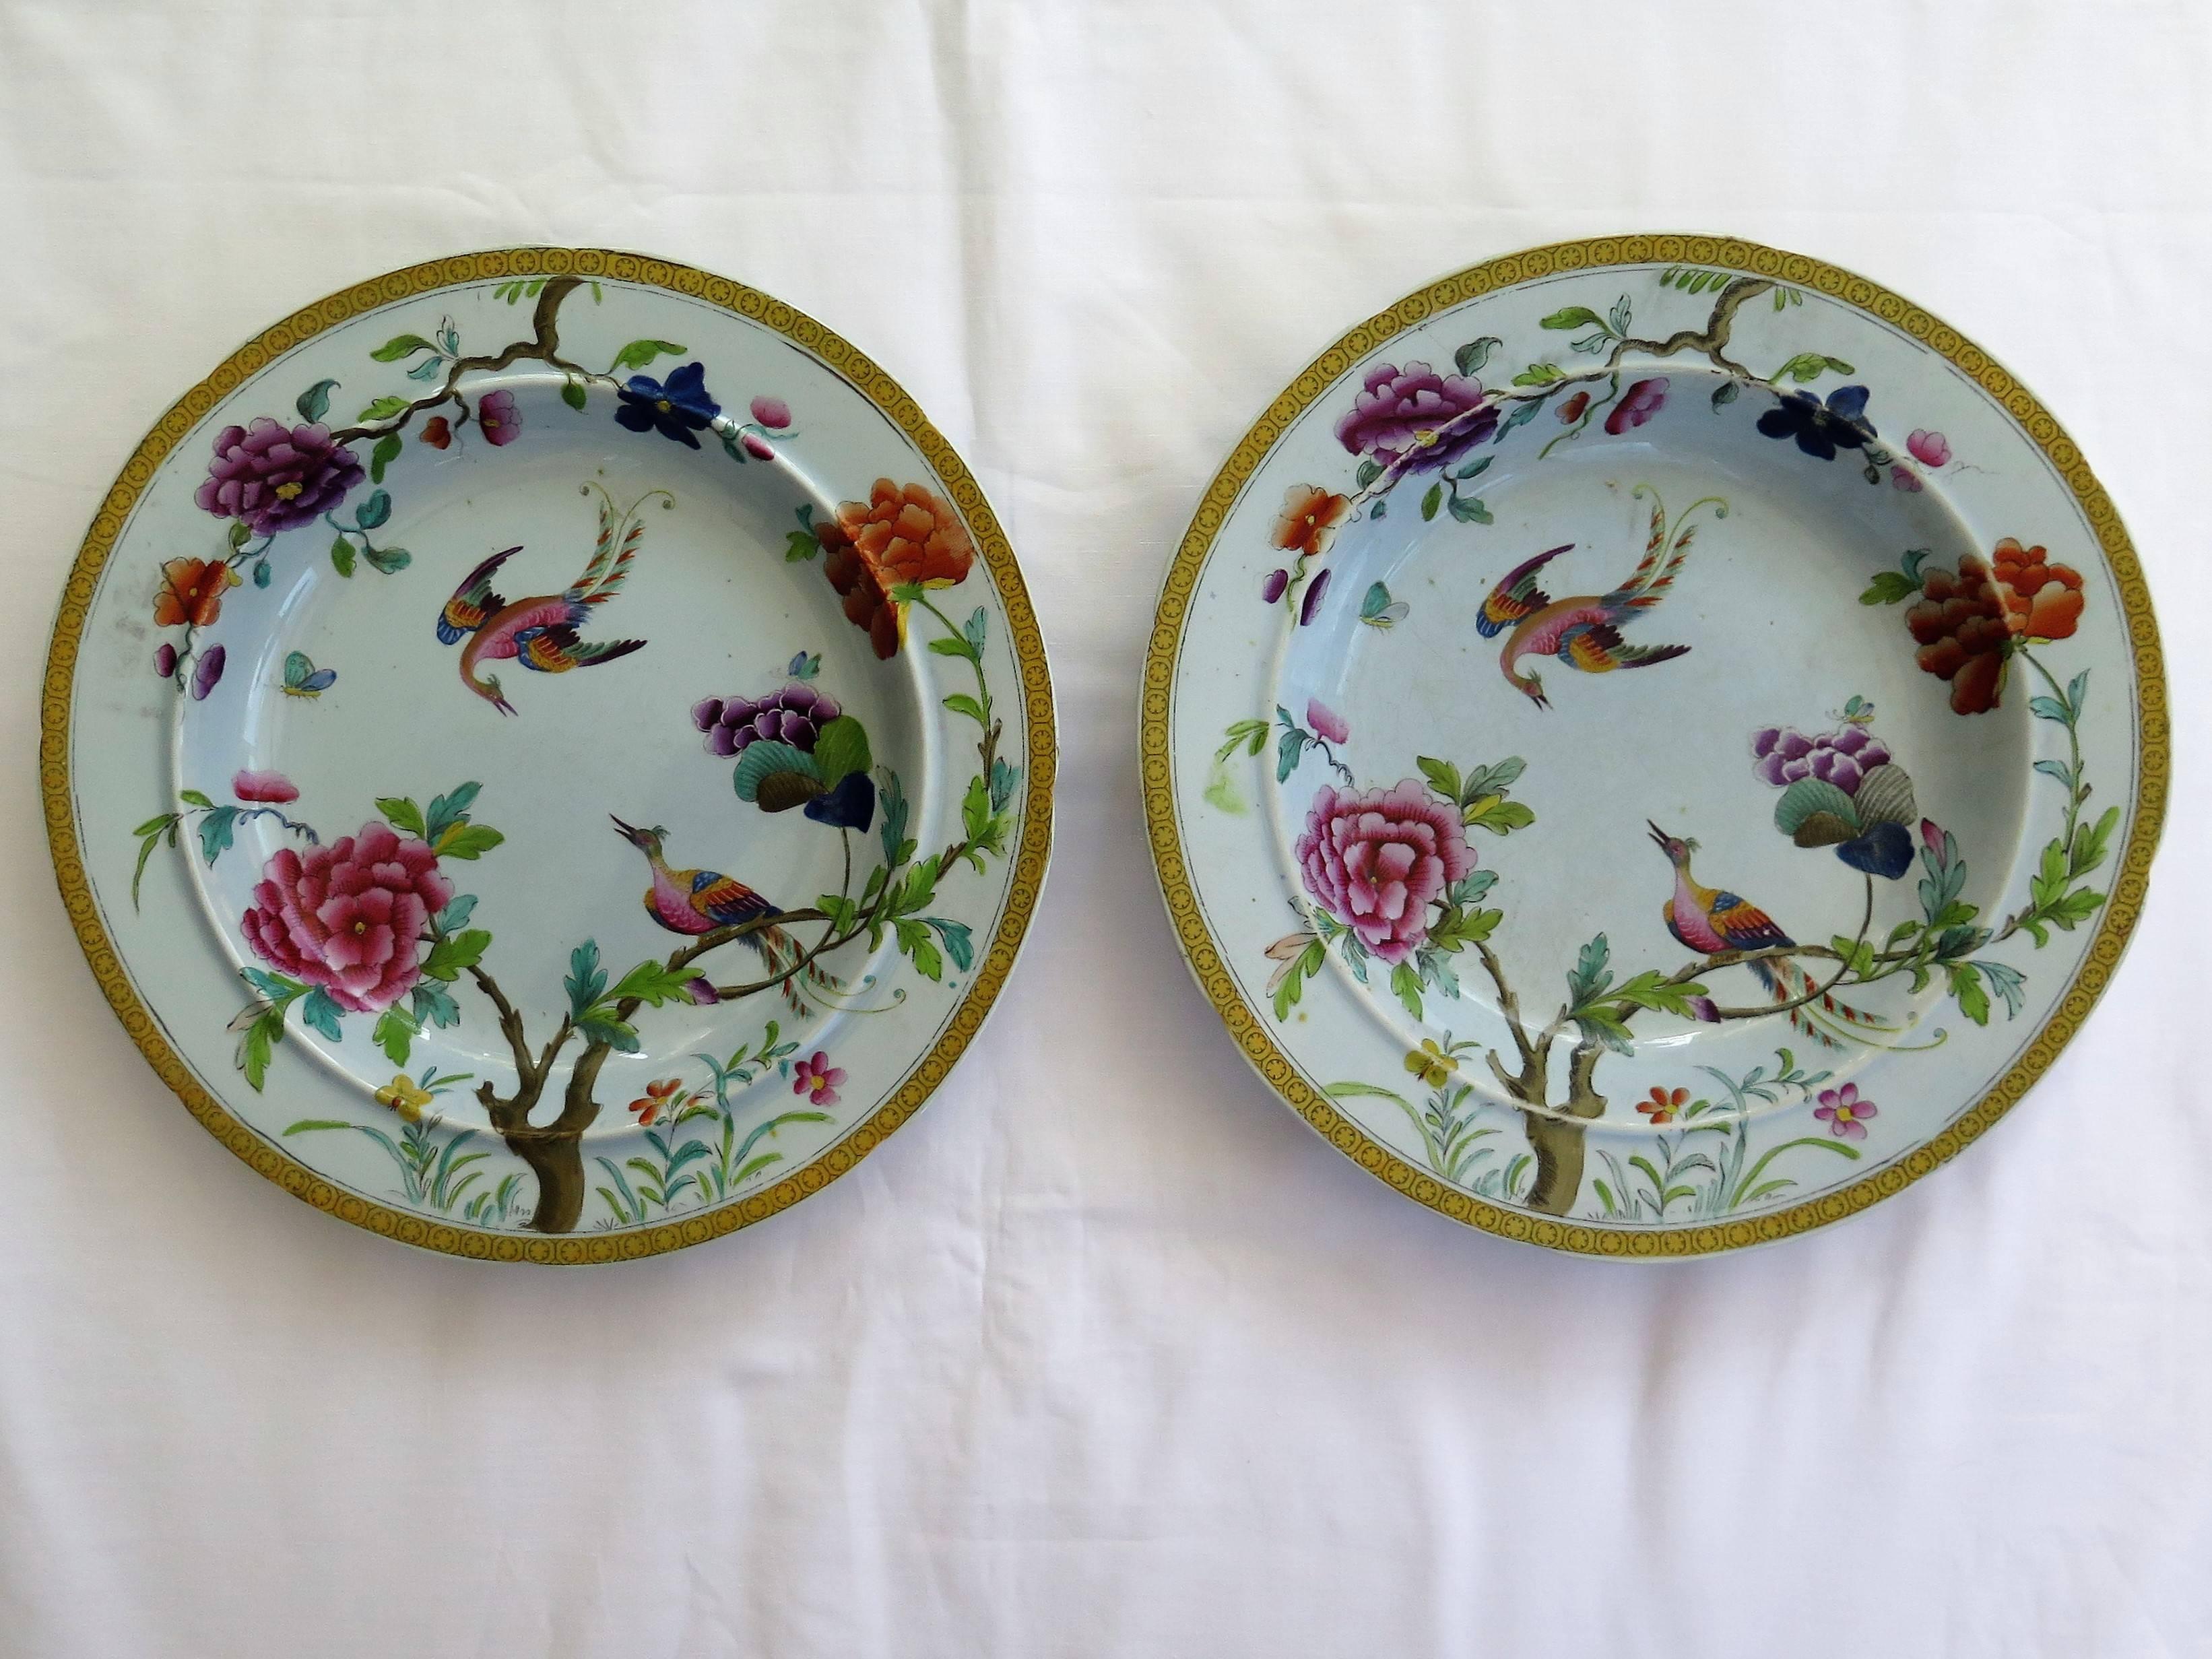 These are a rare early pair of ironstone soup plates or dishes attributed to Stephen Folch of Church Street, Stoke, Staffordshire Potteries, England and made between 1820 and 1830.

Both plates have a light grey-blue glaze and have been beautifully